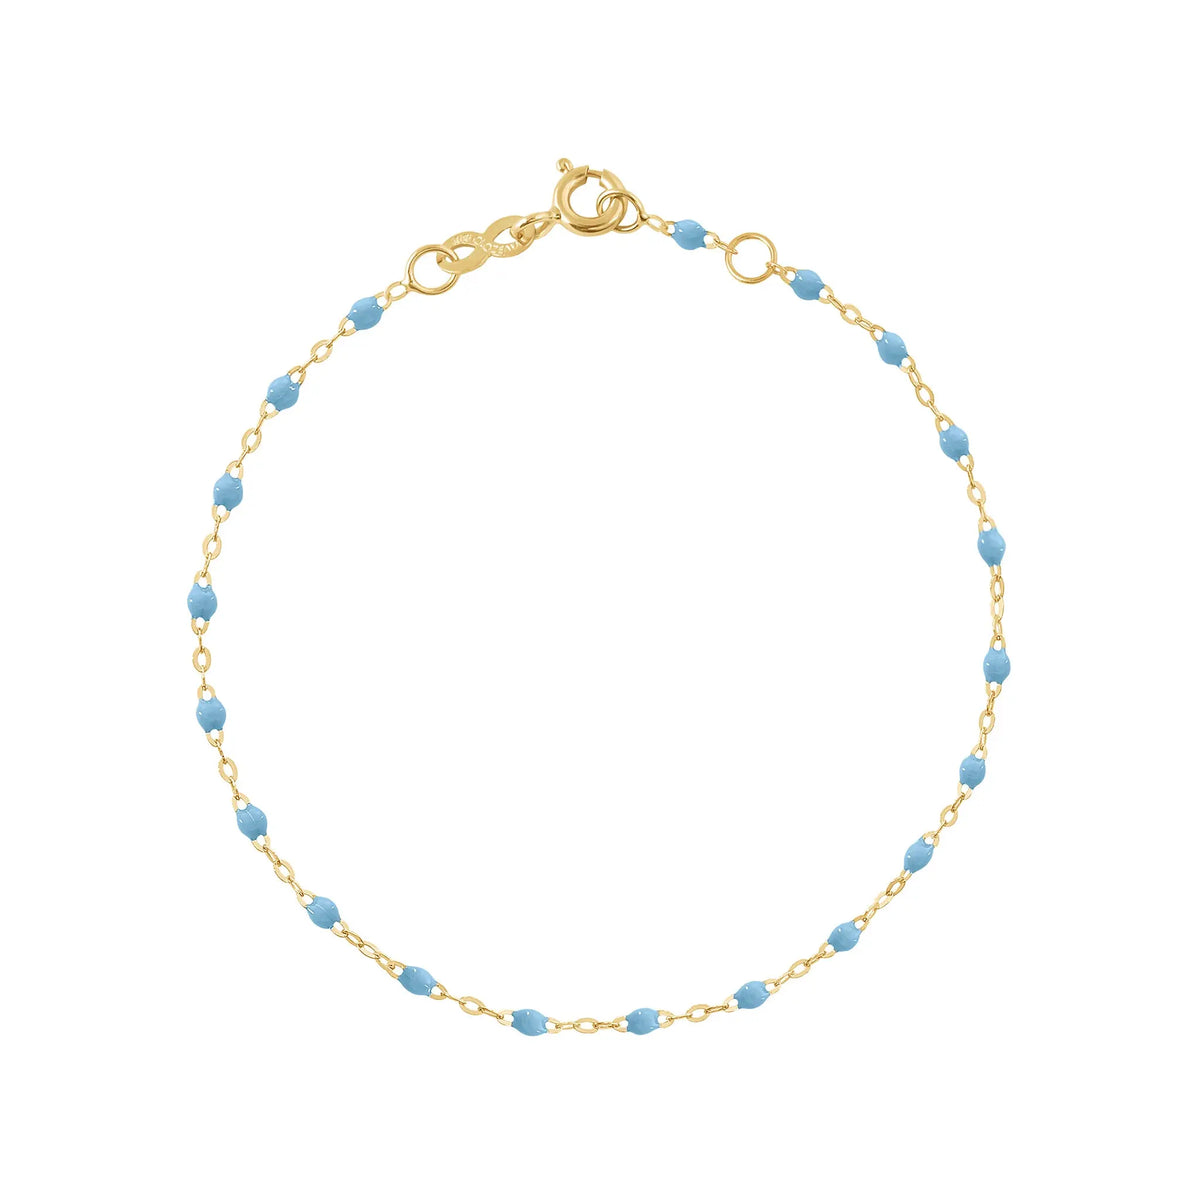 The Classic Gigi bracelet by gigi CLOZEAU features 18K Yellow Gold, and unique Turquoise jewels for a simple, everyday look.   Each jewel is unique, artisanally made in their family-owned workshop. 18K yellow gold and resin. The bracelet measures 6.7 inches with adjustable clasp at 6.3 inches.